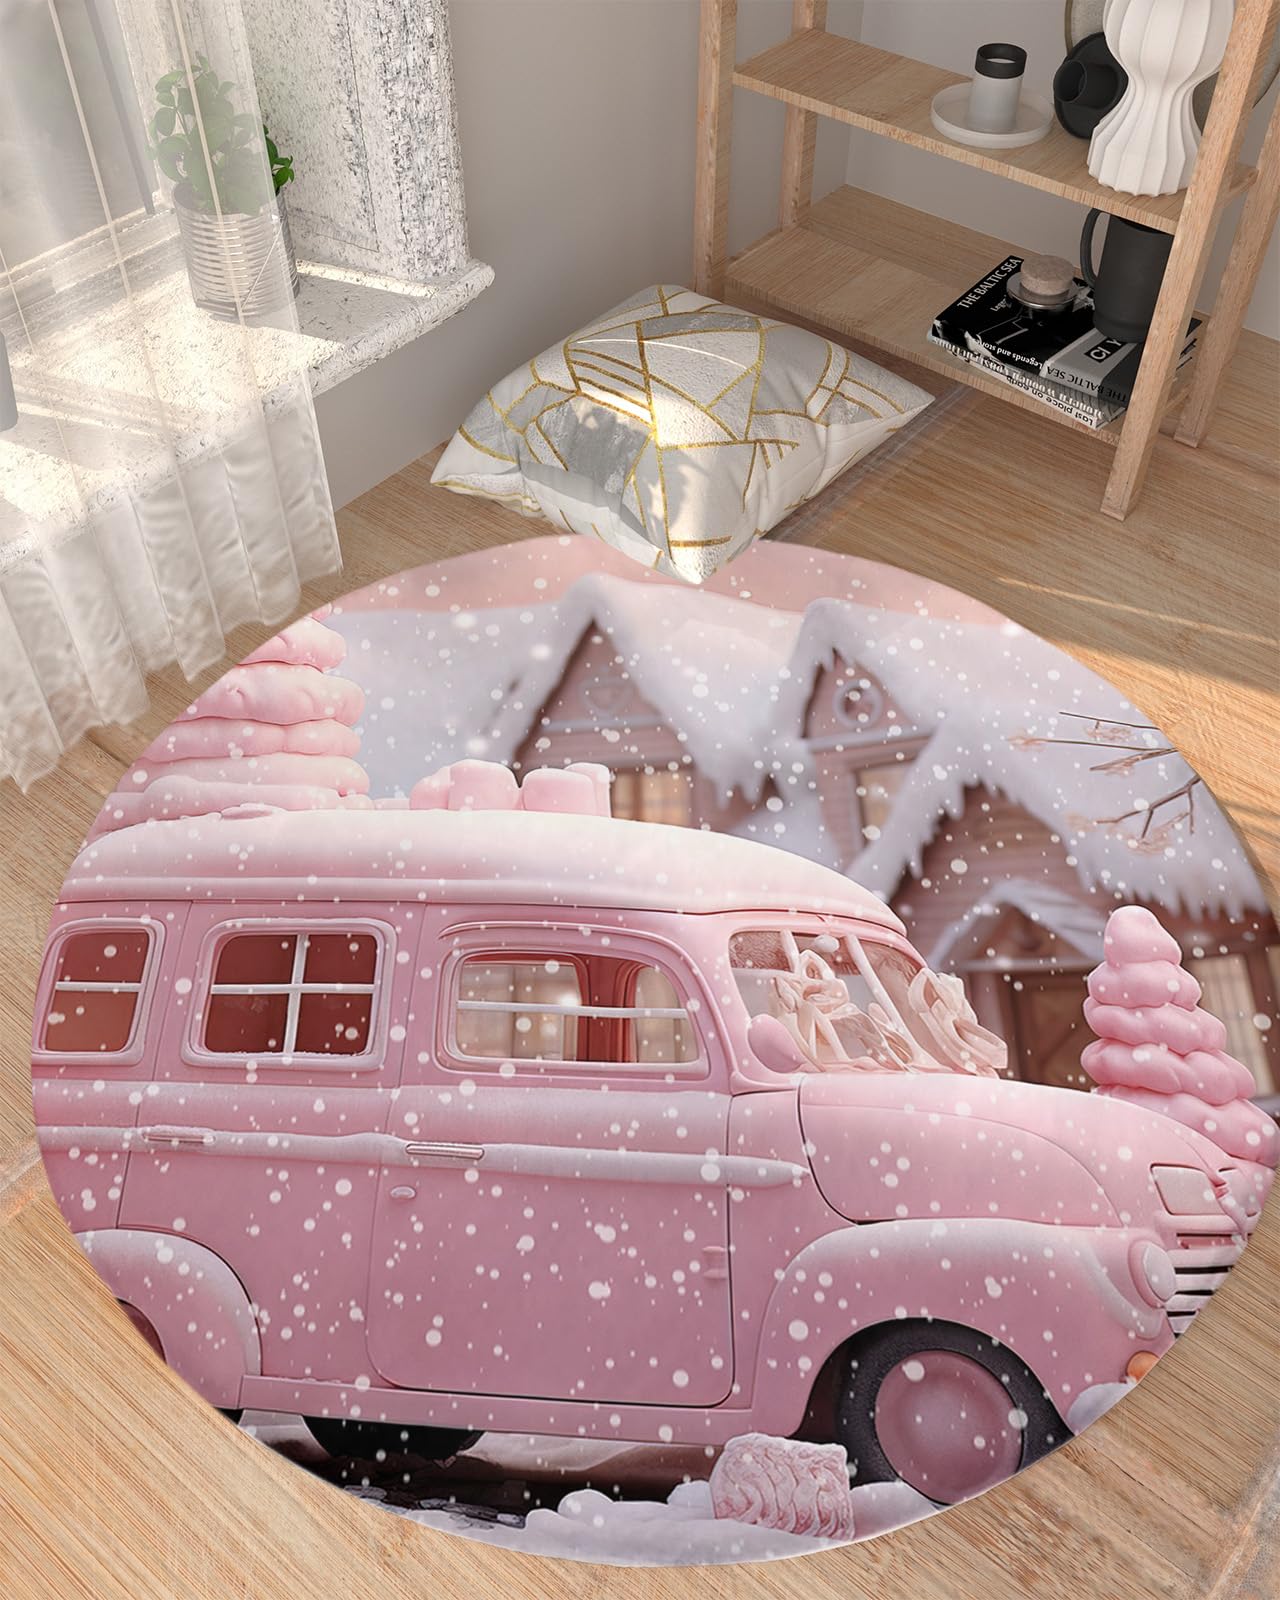 Christmas Fluffy Round Area Rug Carpets 3ft, Plush Shaggy Carpet Soft Circular Rugs, Non-Slip Fuzzy Accent Floor Mat for Living Room Bedroom Nursery Home Decor Blush Pink Farmhouse Winter Truck